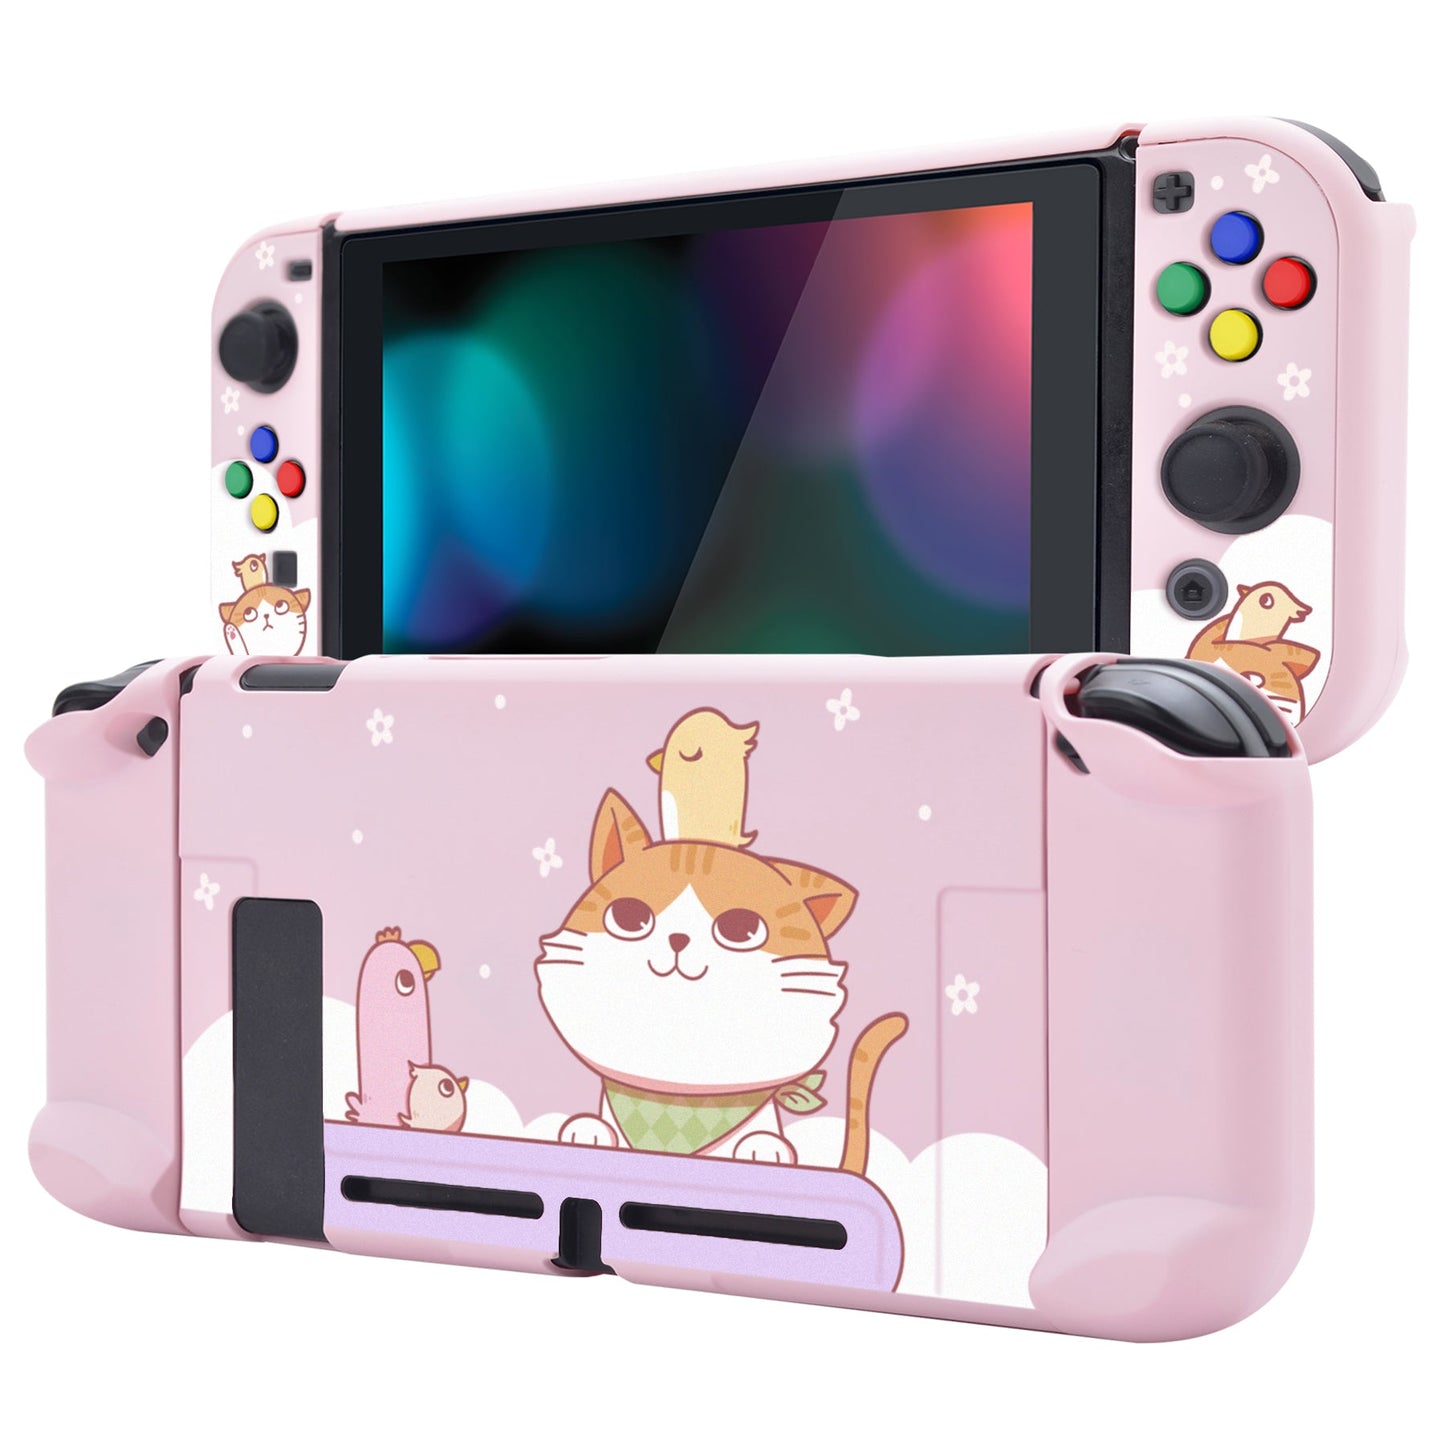 PlayVital Kitten & Chicken Back Cover for NS Switch Console, NS Joycon Handheld Controller Separable Protector Hard Shell, Dockable Protective Case with Colorful ABXY Direction Button Caps - NTT109 PlayVital